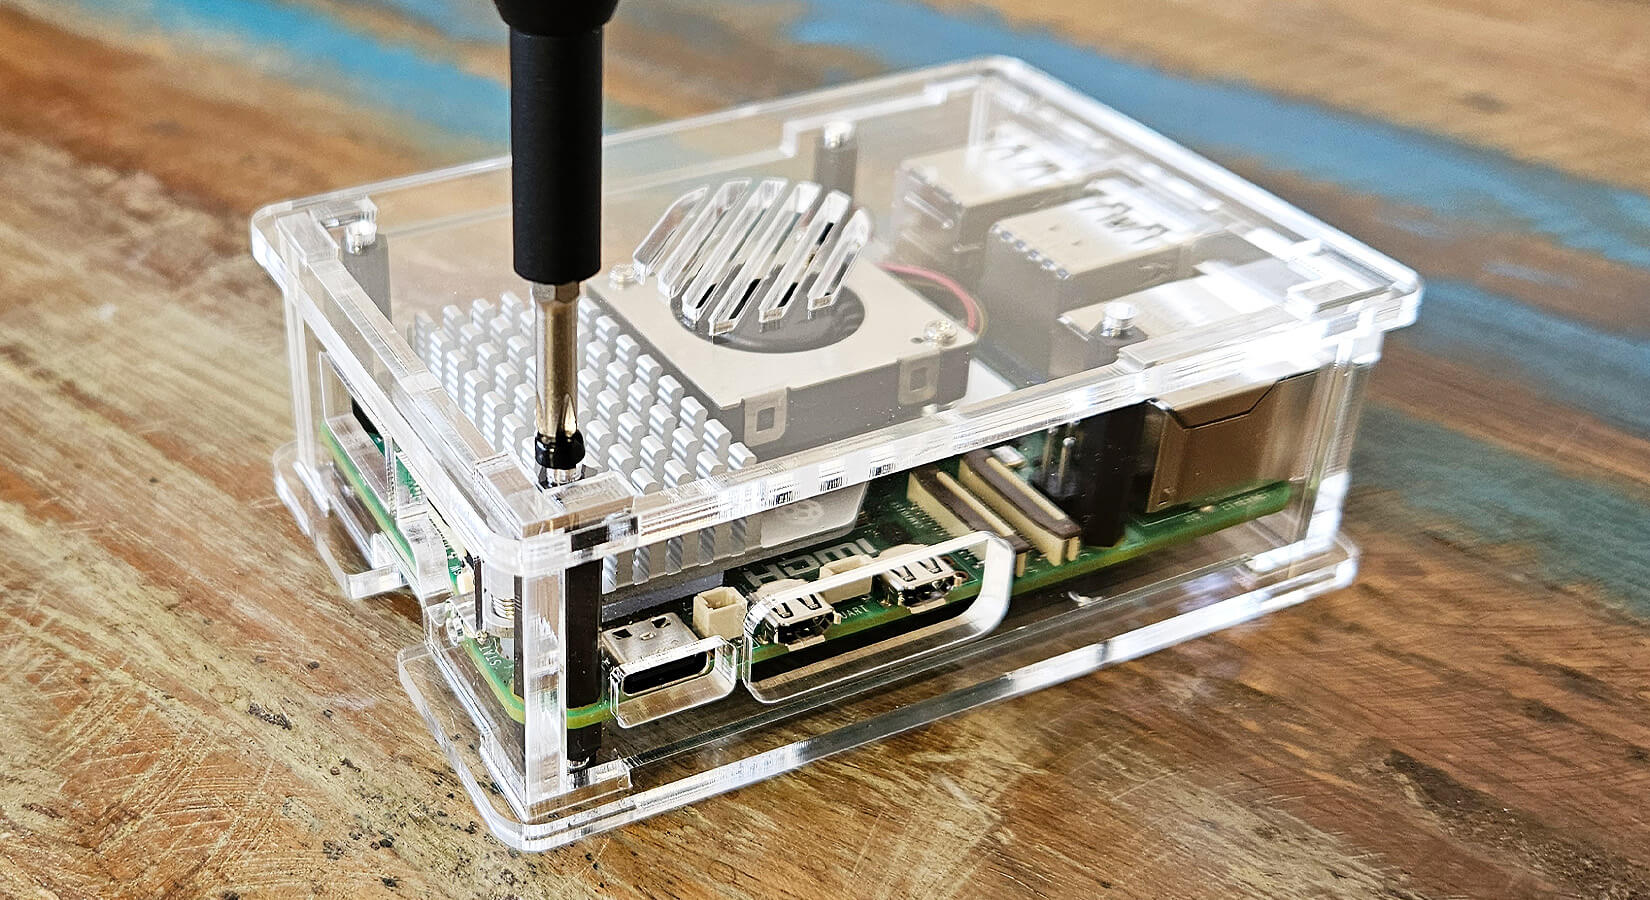 Assembly Guide for the Raspberry Pi 5 Active Cooler Case